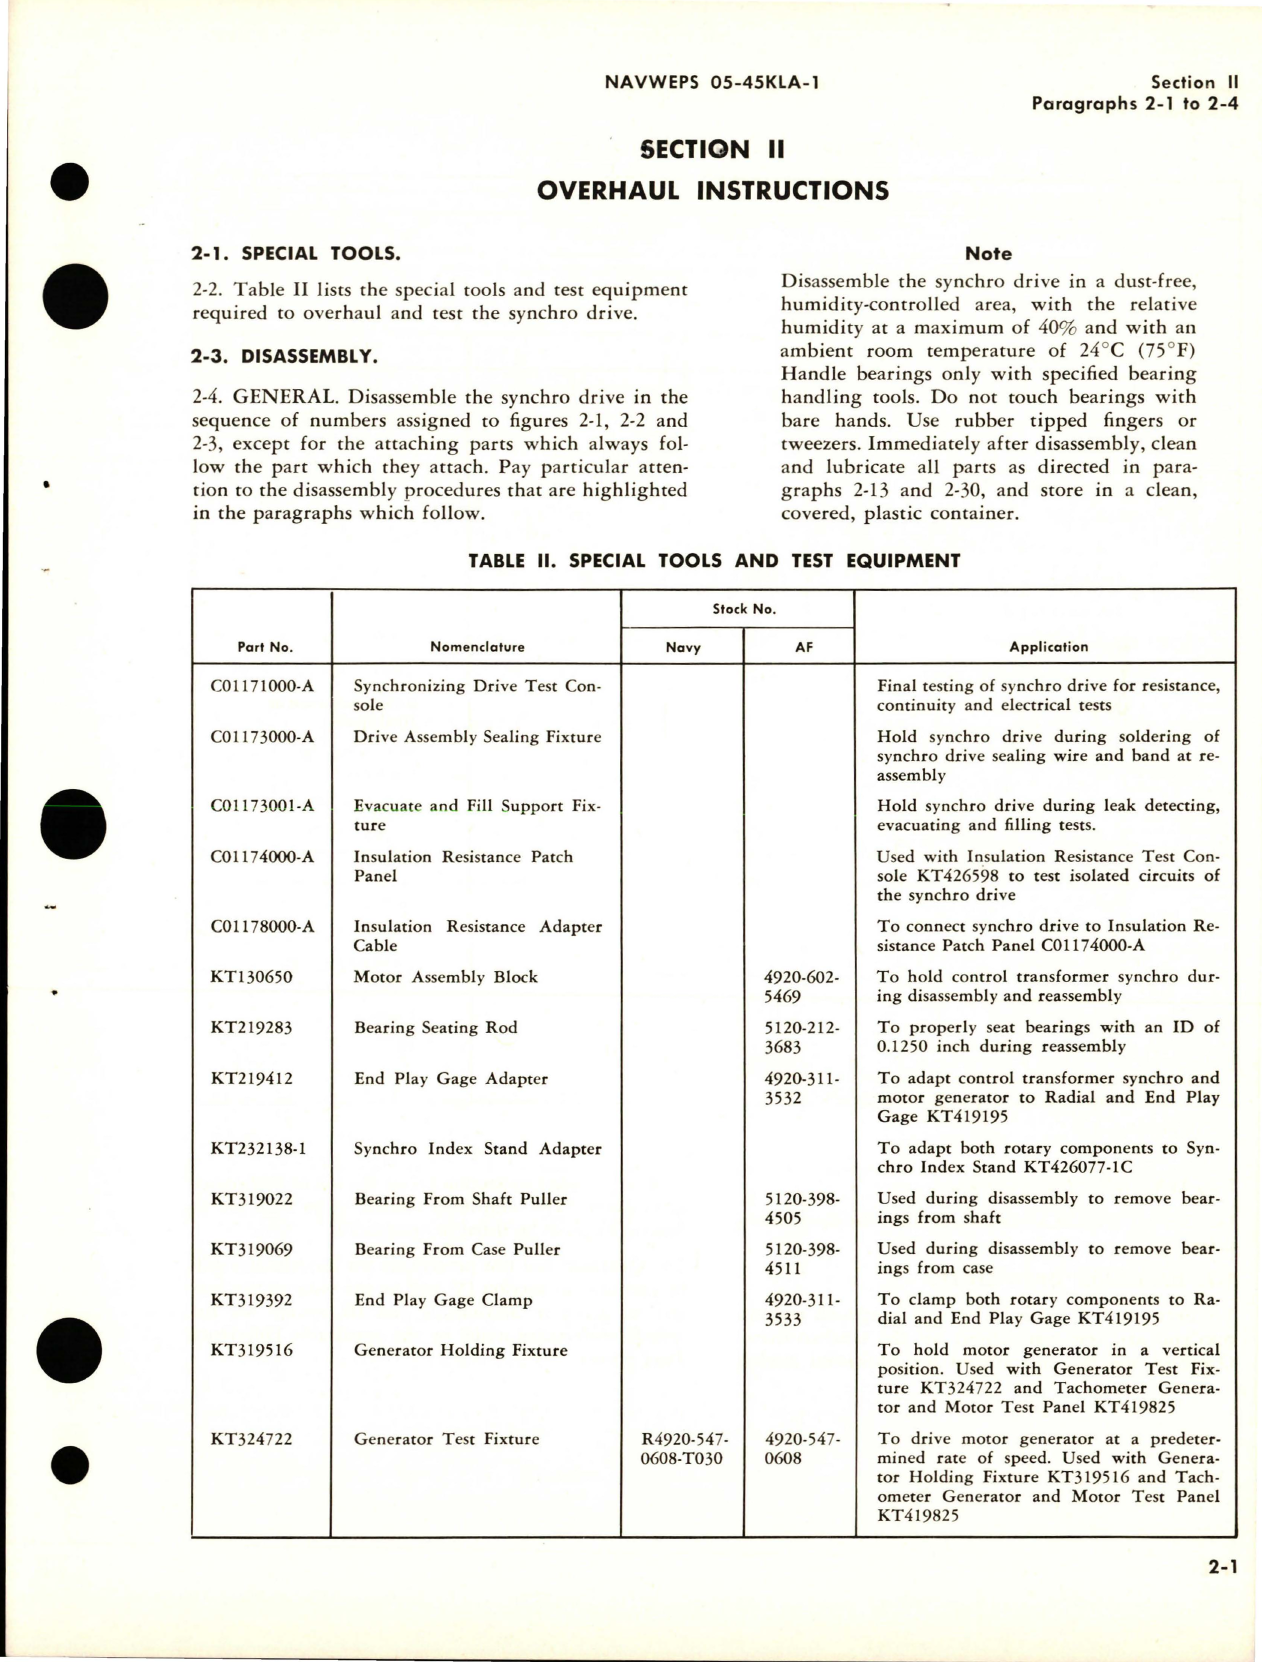 Sample page 7 from AirCorps Library document: Overhaul Instructions for Two Speed Synchro Canceller Drive - Part 425004-2A